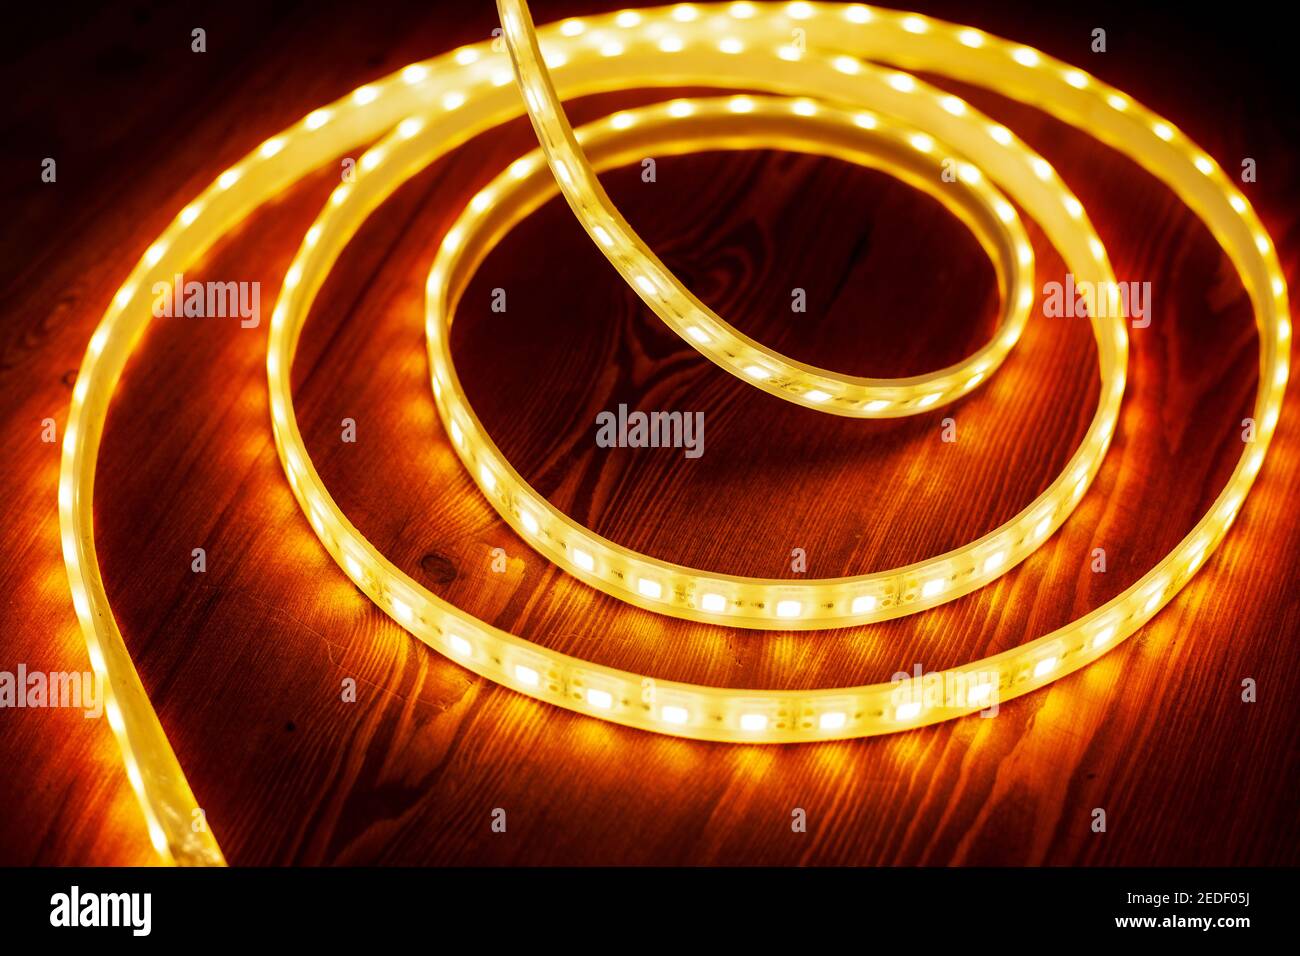 beautiful glowing LED strip of warm light for mounting decorative lighting for homes, offices and other dark places Stock Photo